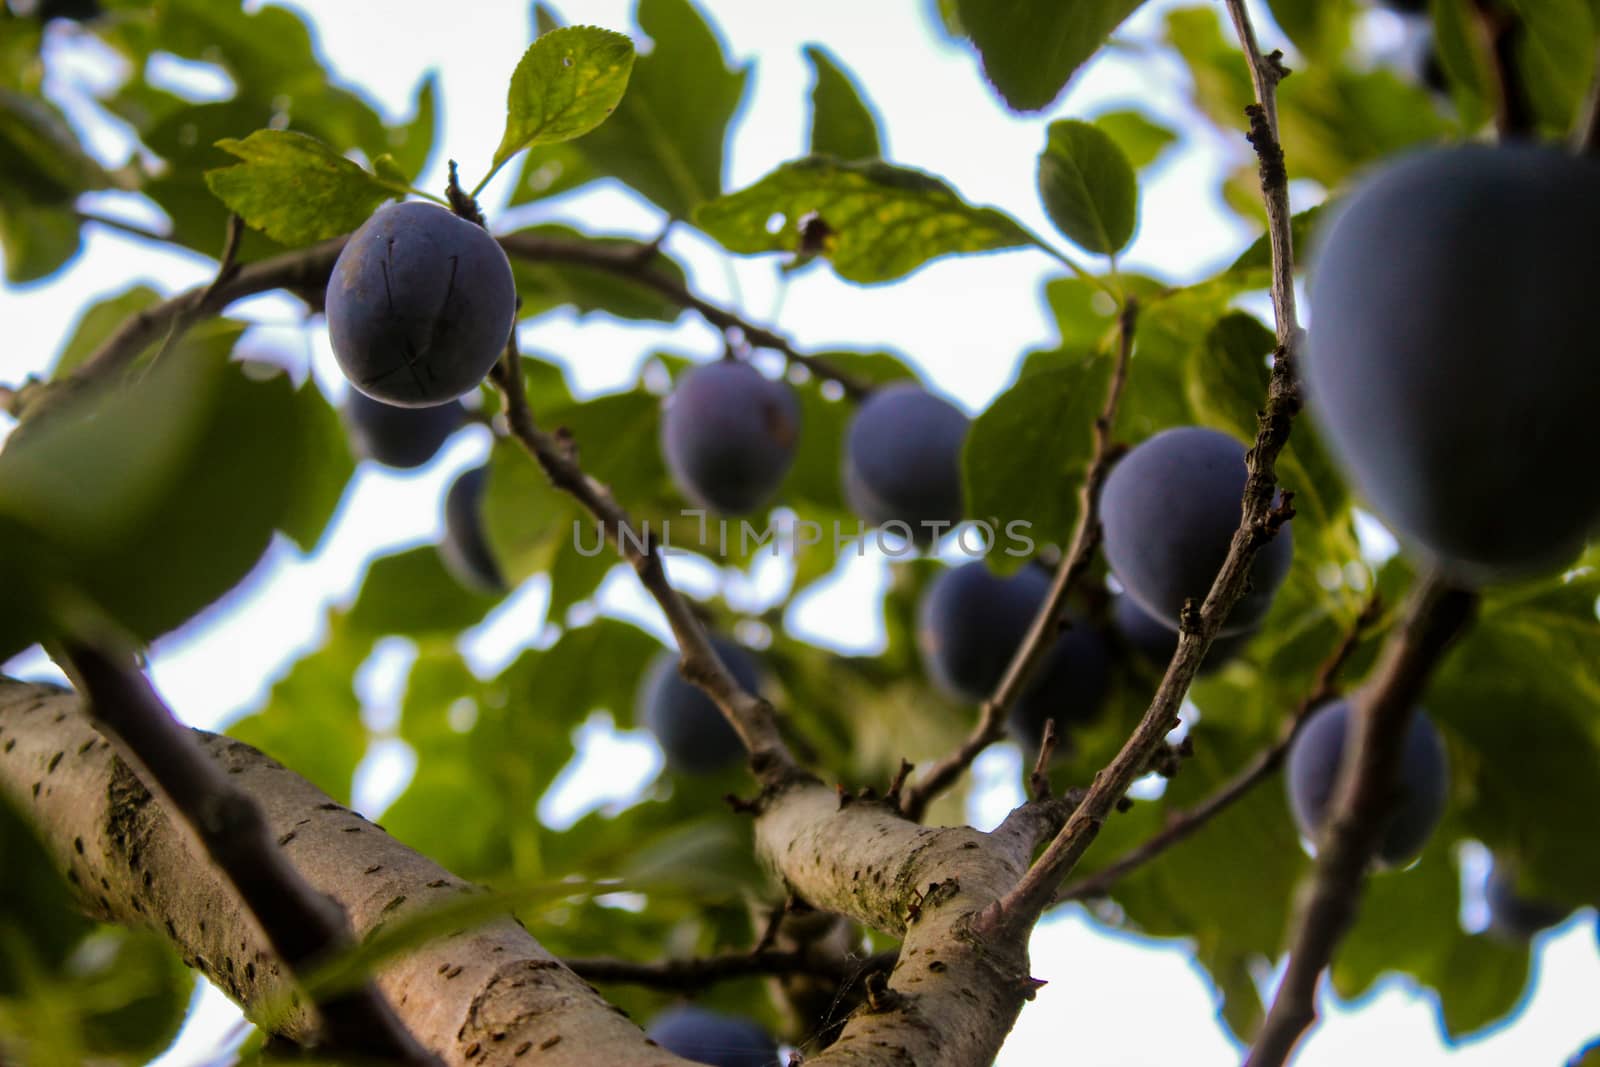 Plum branch on which they have ripe plums and leaves. Zavidovici, Bosnia and Herzegovina.